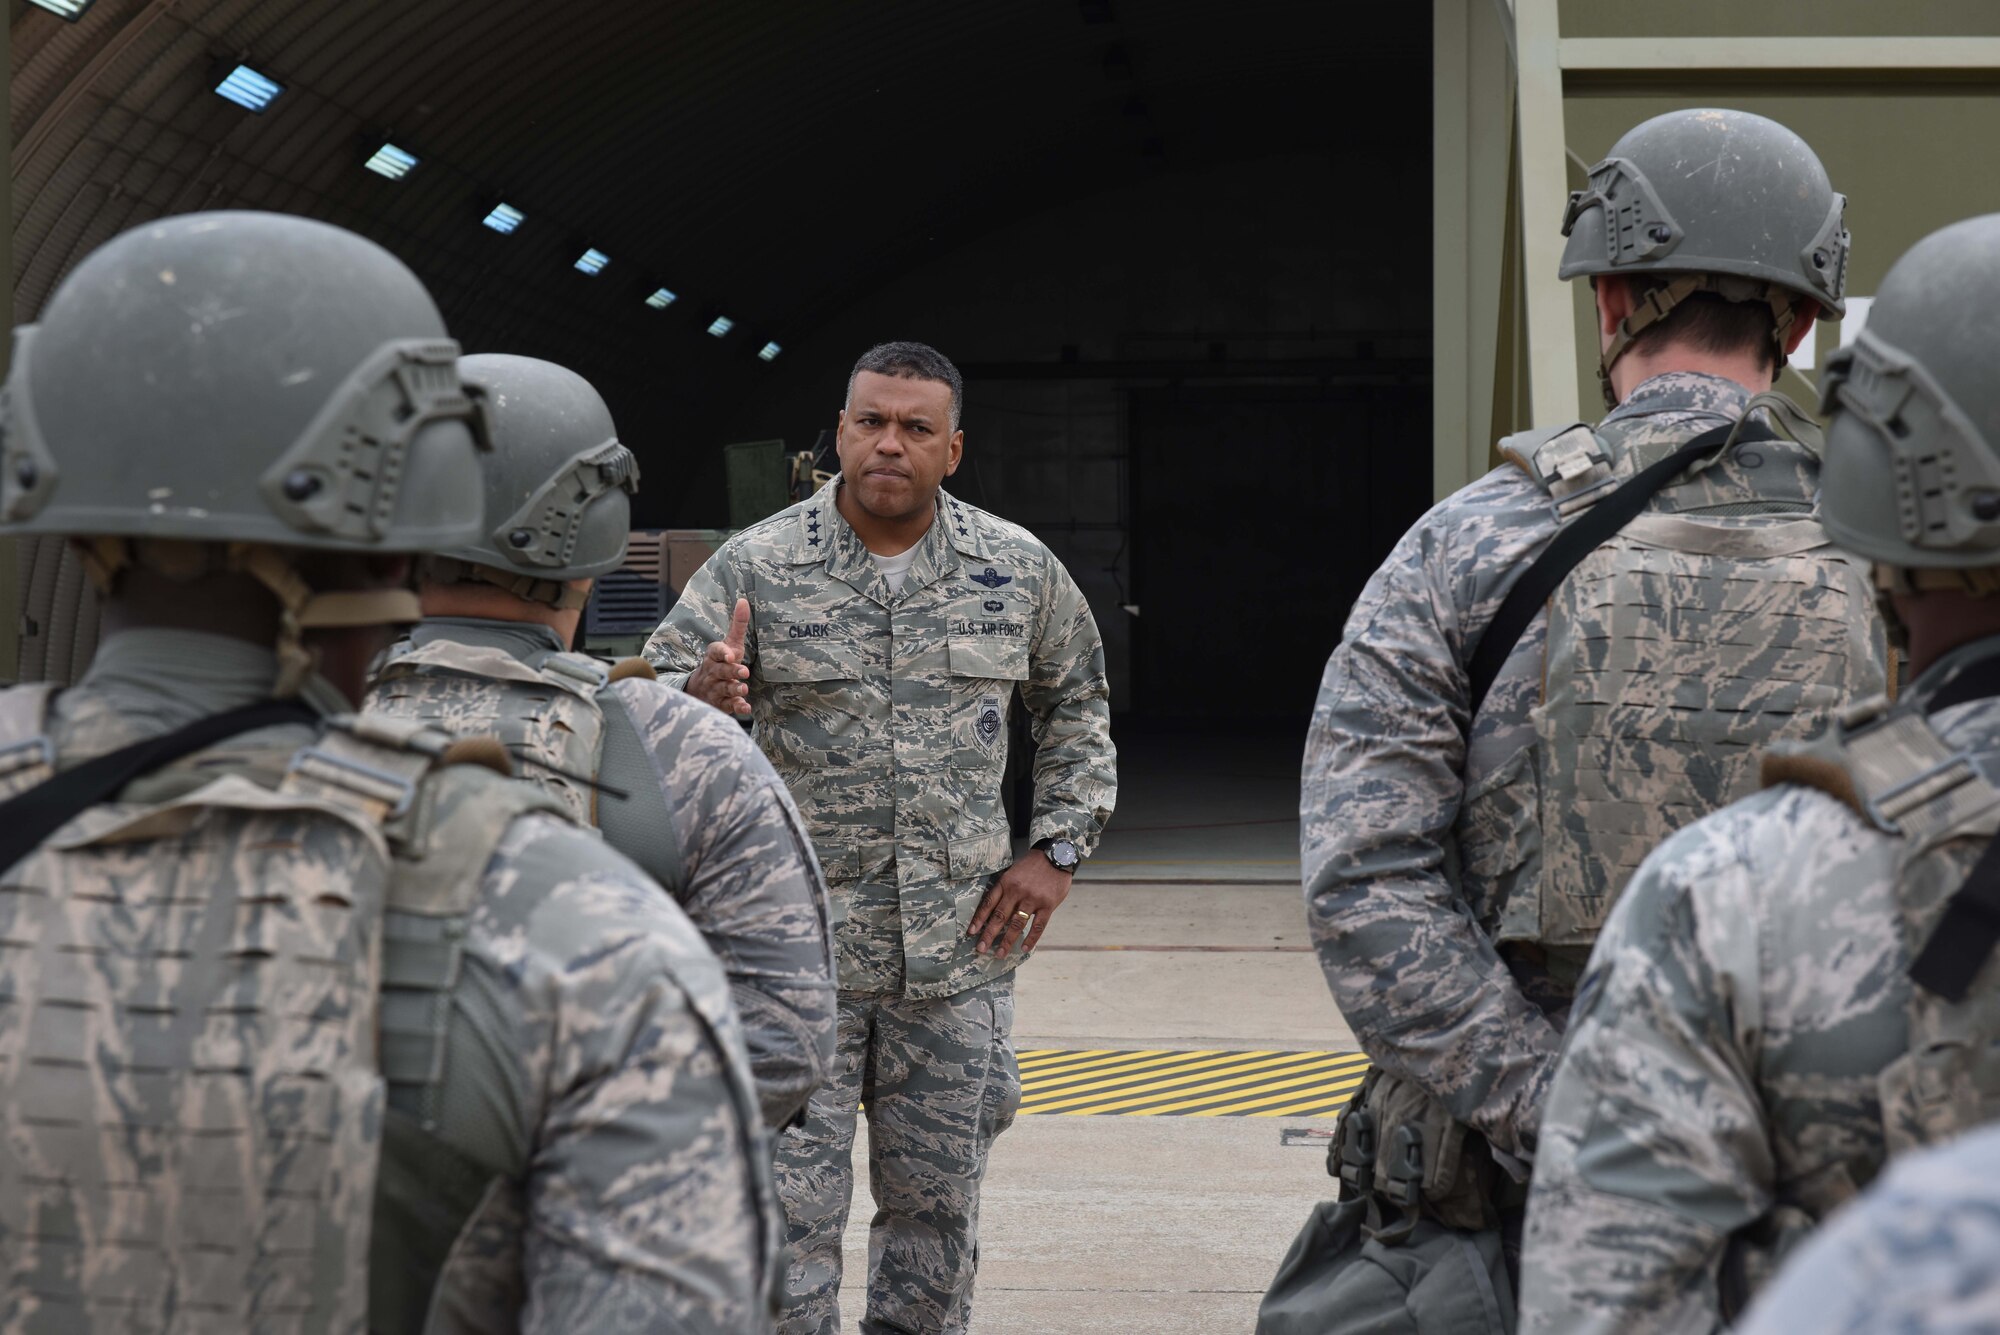 U.S. Air Force Lt. Gen. Richard M. Clark, 3rd Air Force commander, speaks to 39th Security Forces Squadron troops after a readiness exercise at Incirlik Air Base, Turkey, Feb. 9, 2018.